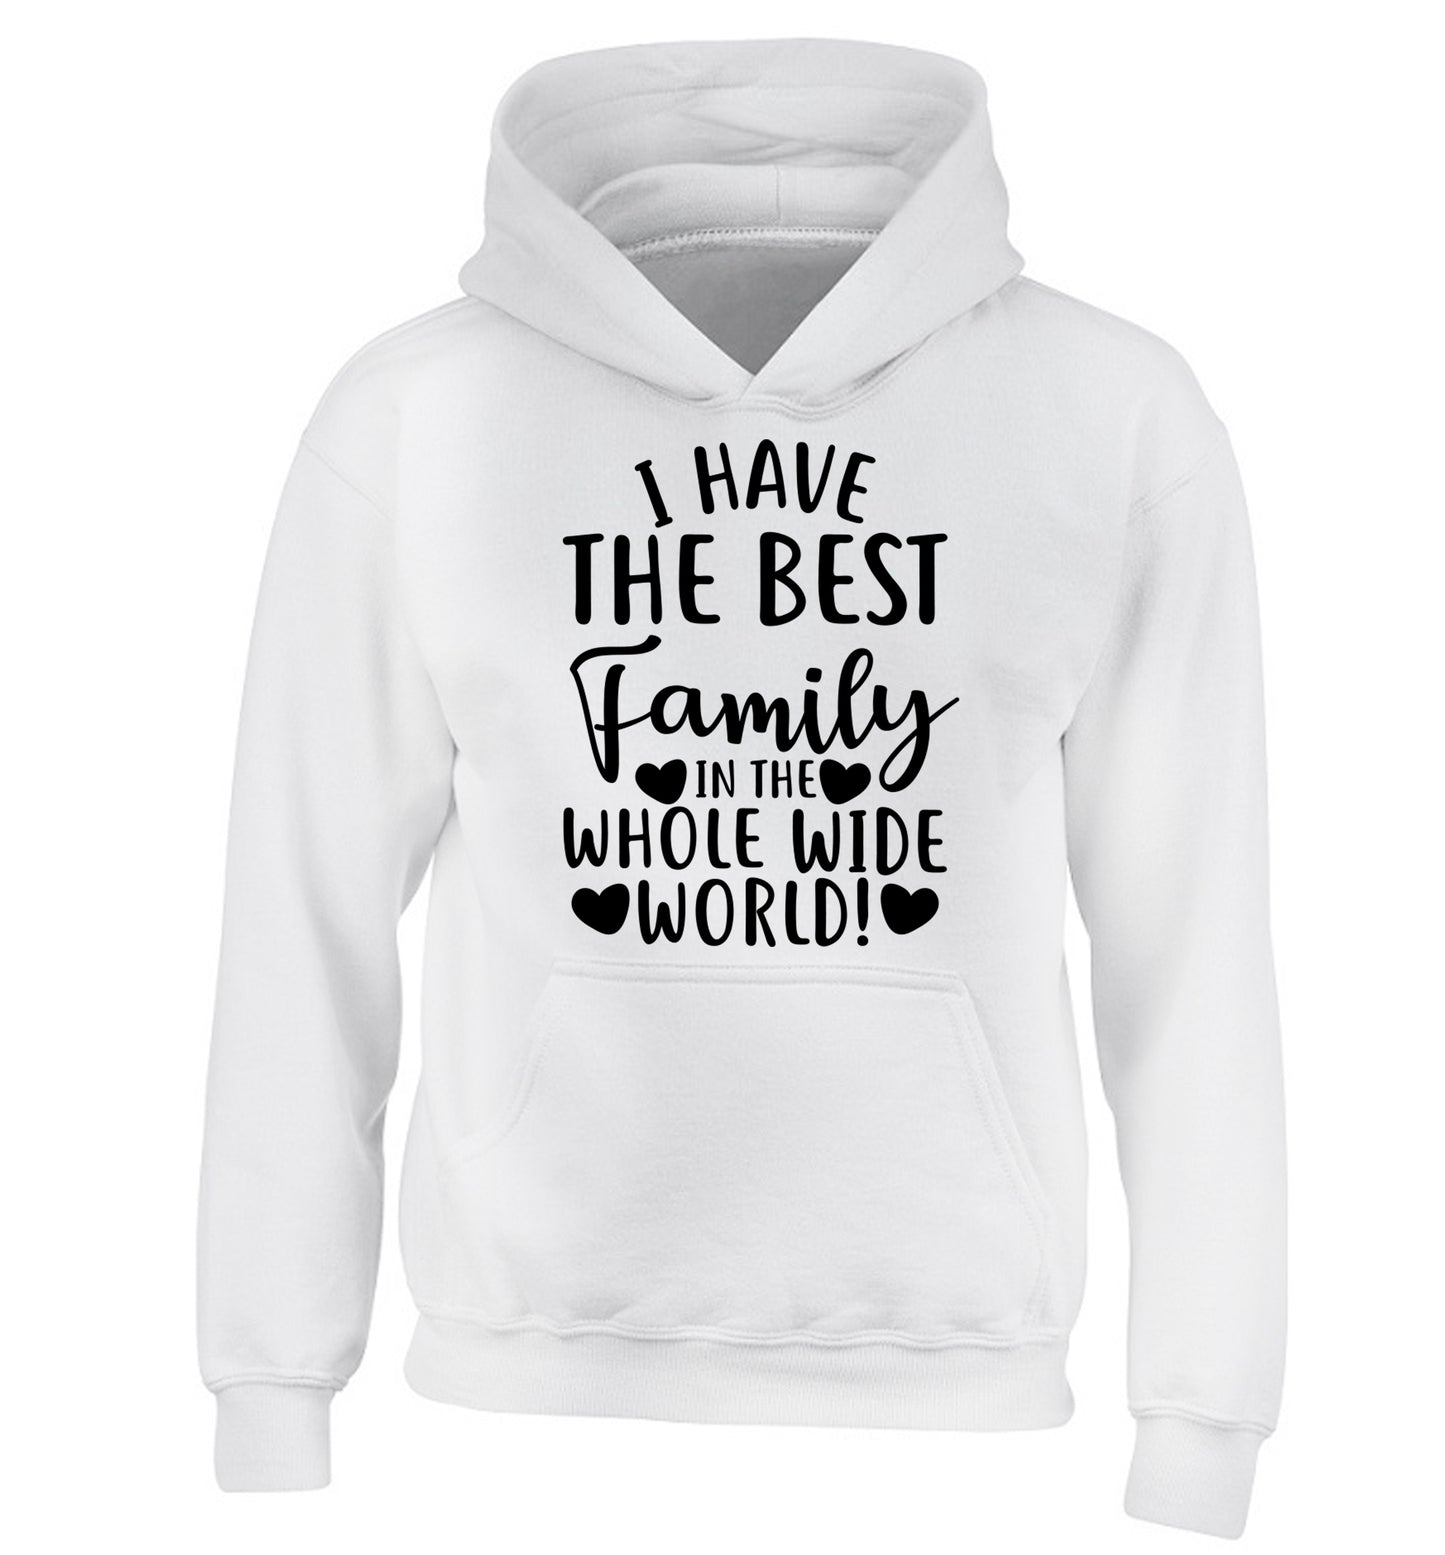 I have the best family in the whole wide world! children's white hoodie 12-13 Years